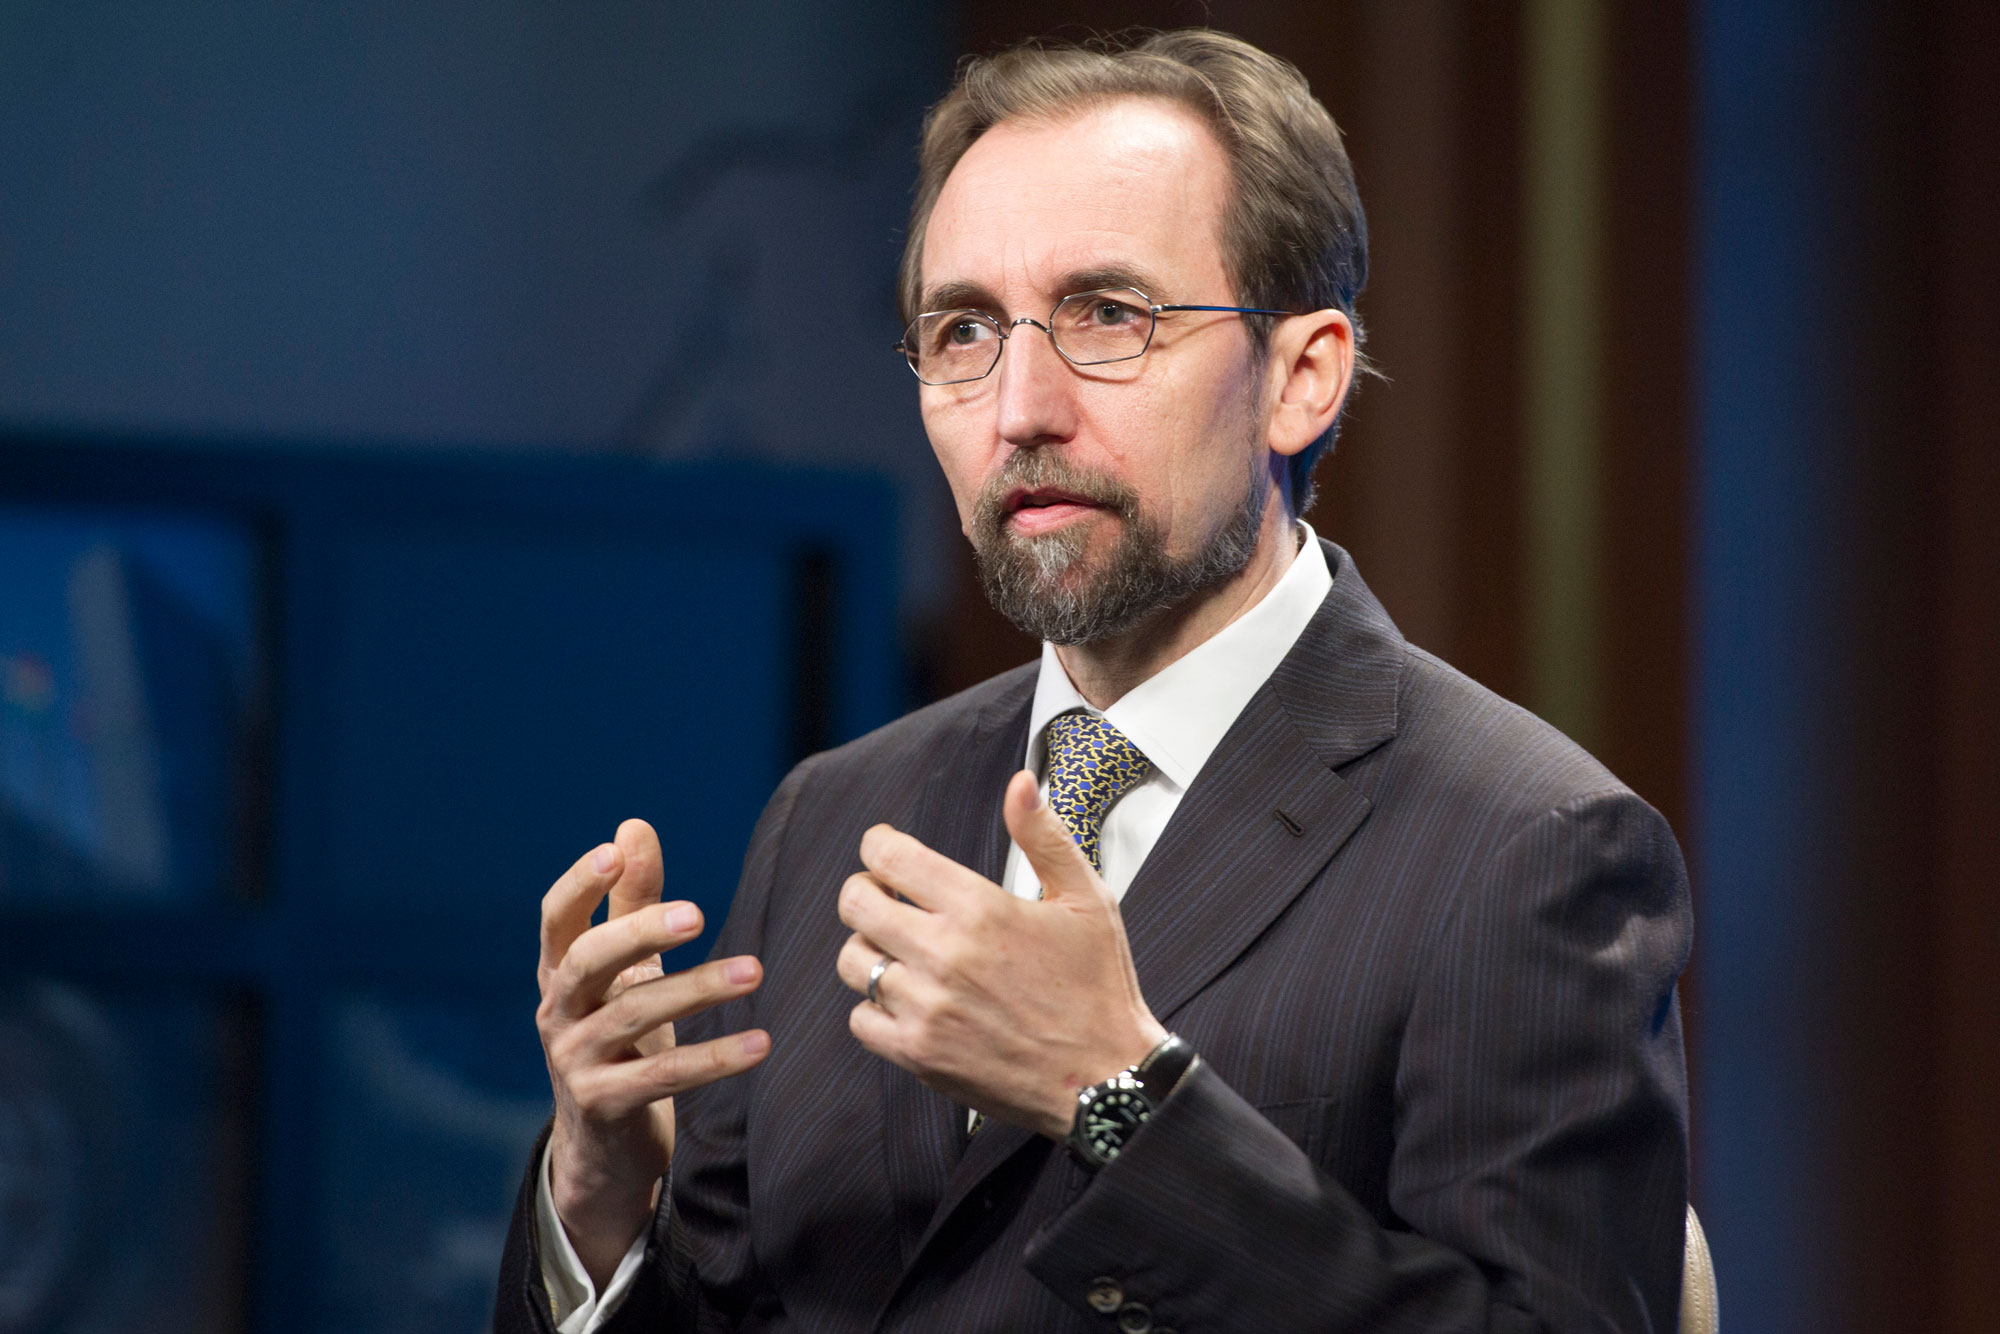 The  UN High Commissioner for Human Rights, Zeid Ra